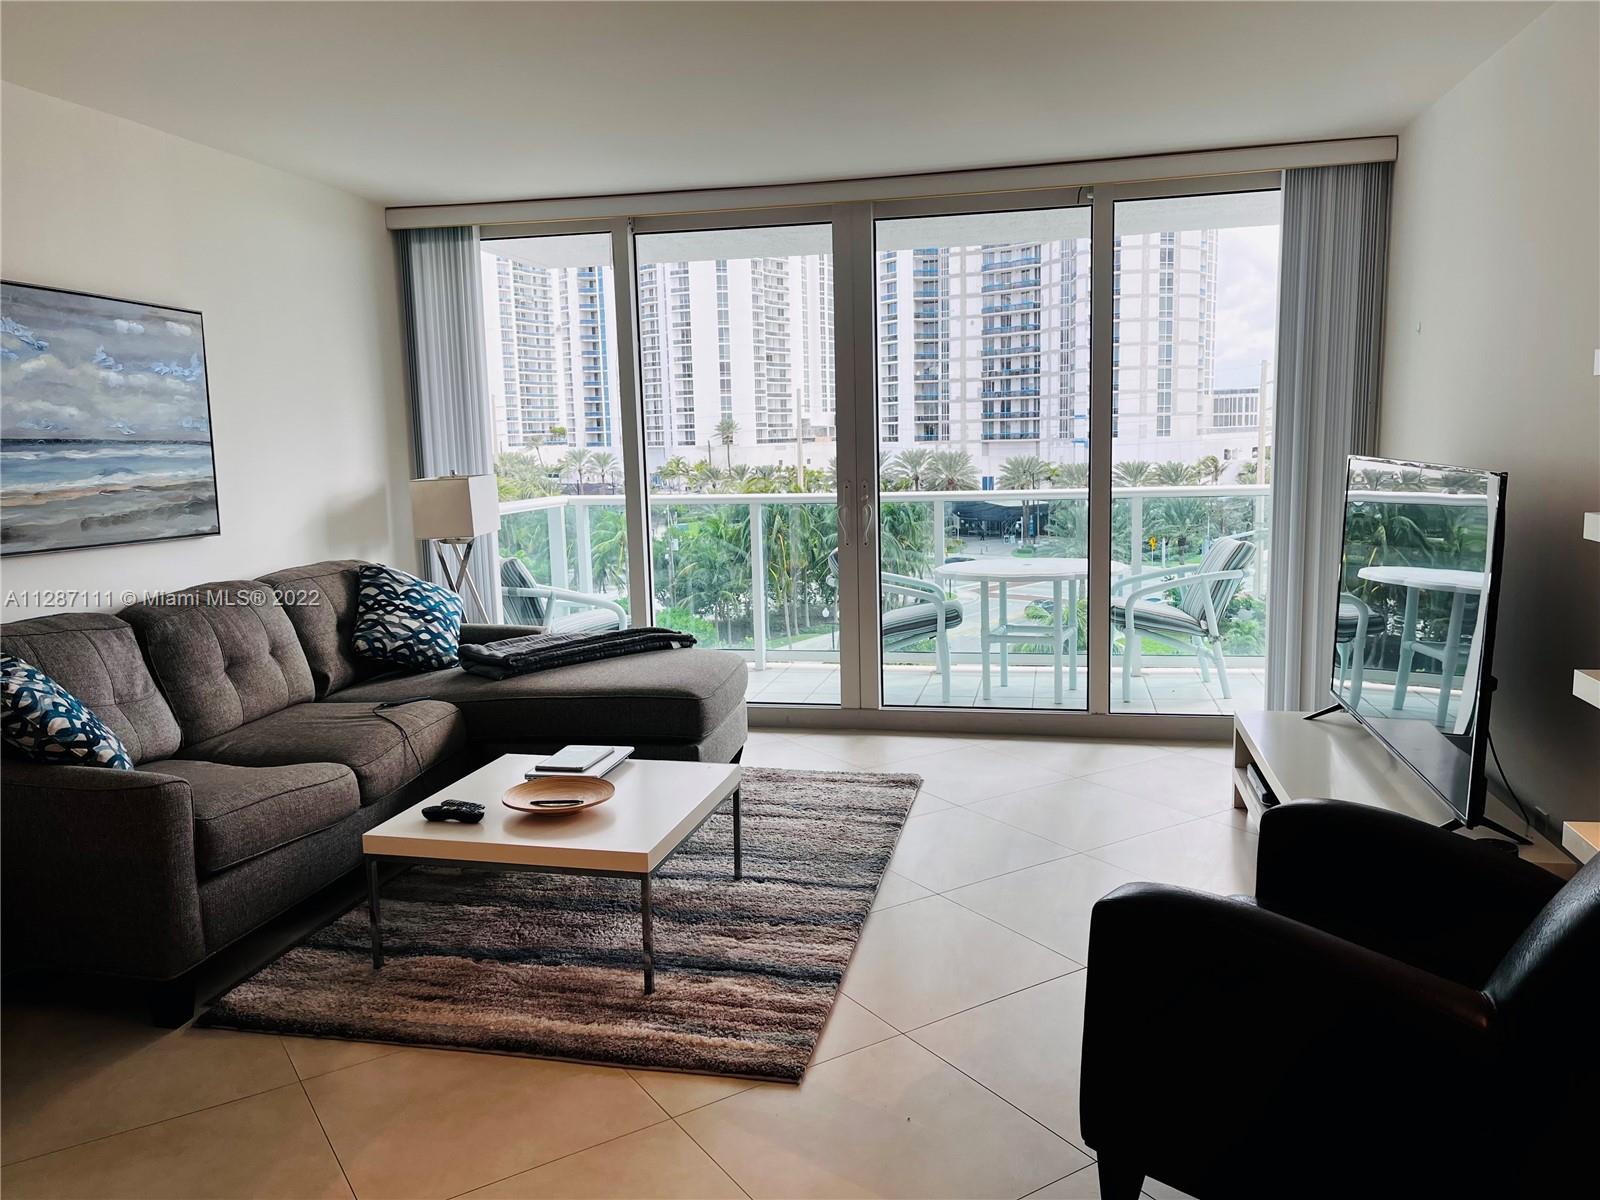 100 Bayview Dr 611, Sunny Isles Beach, FL 33160, 1 Bedroom Bedrooms, ,1 BathroomBathrooms,Residential,For Sale,Bayview Dr,A11287111